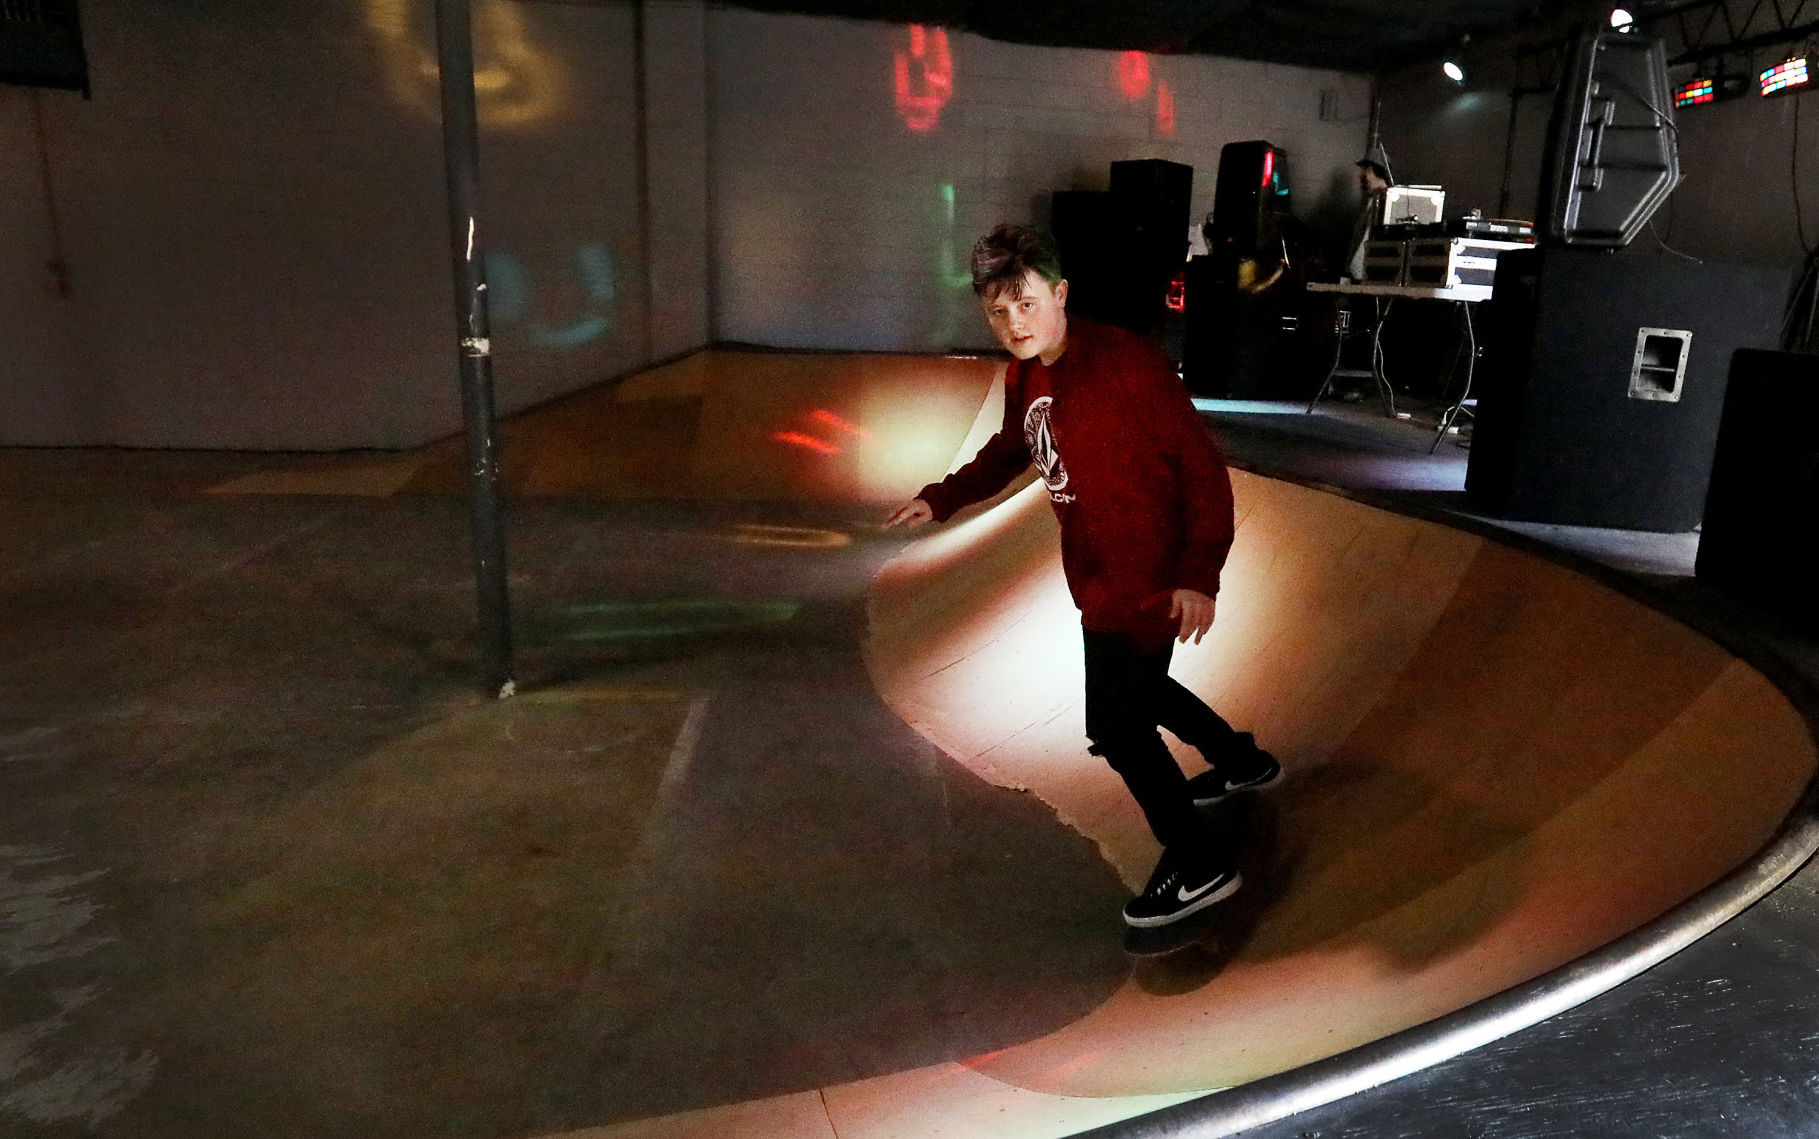 HORLYK: New venue gives Siouxland skateboarders an indoor option